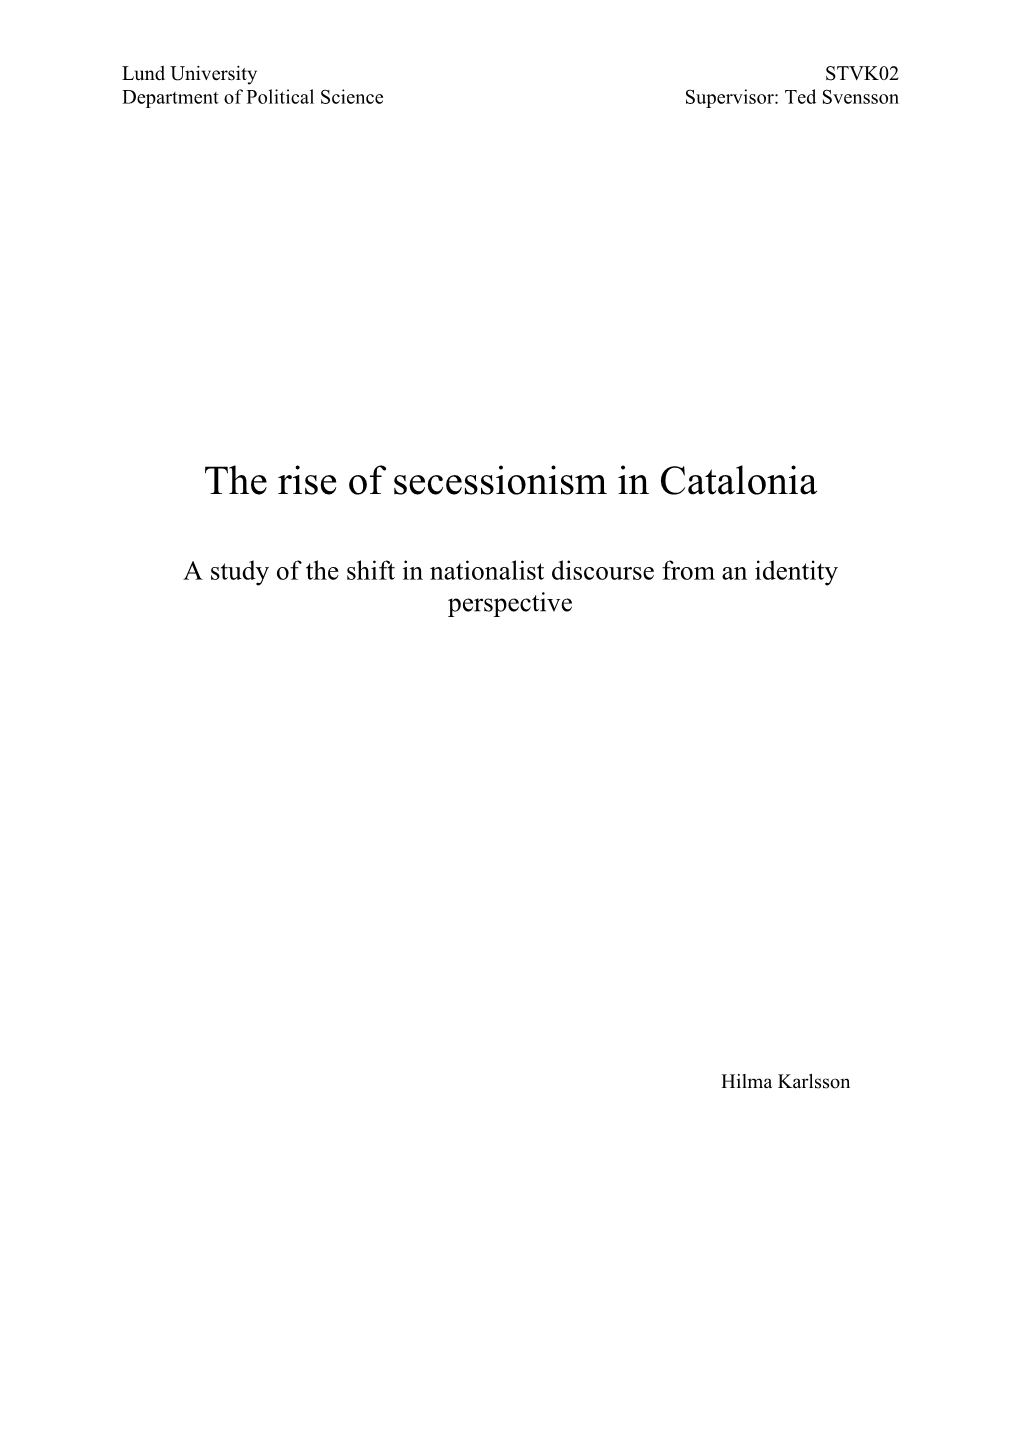 The Rise of Secessionism in Catalonia